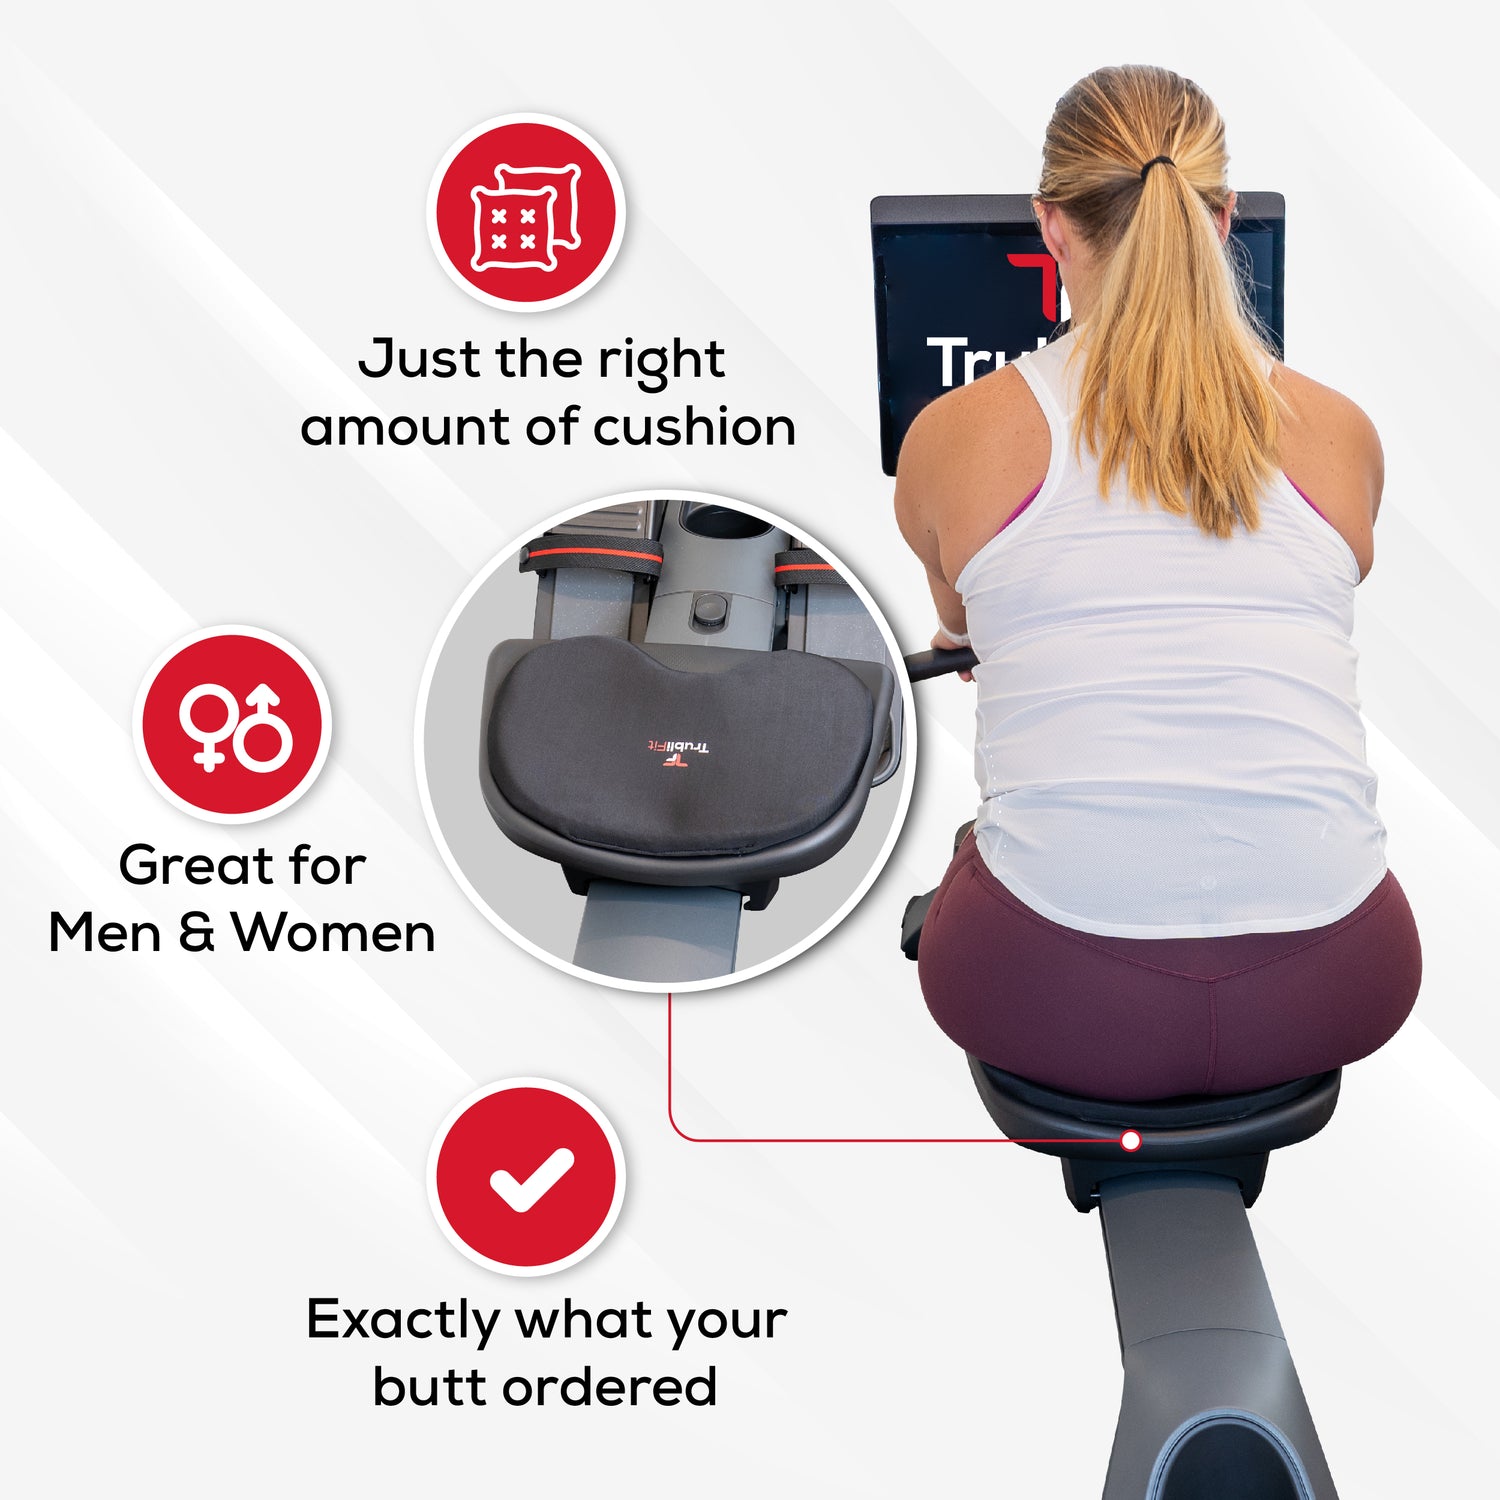 Padded Seat Cushion for Peloton Row – TrubliFit